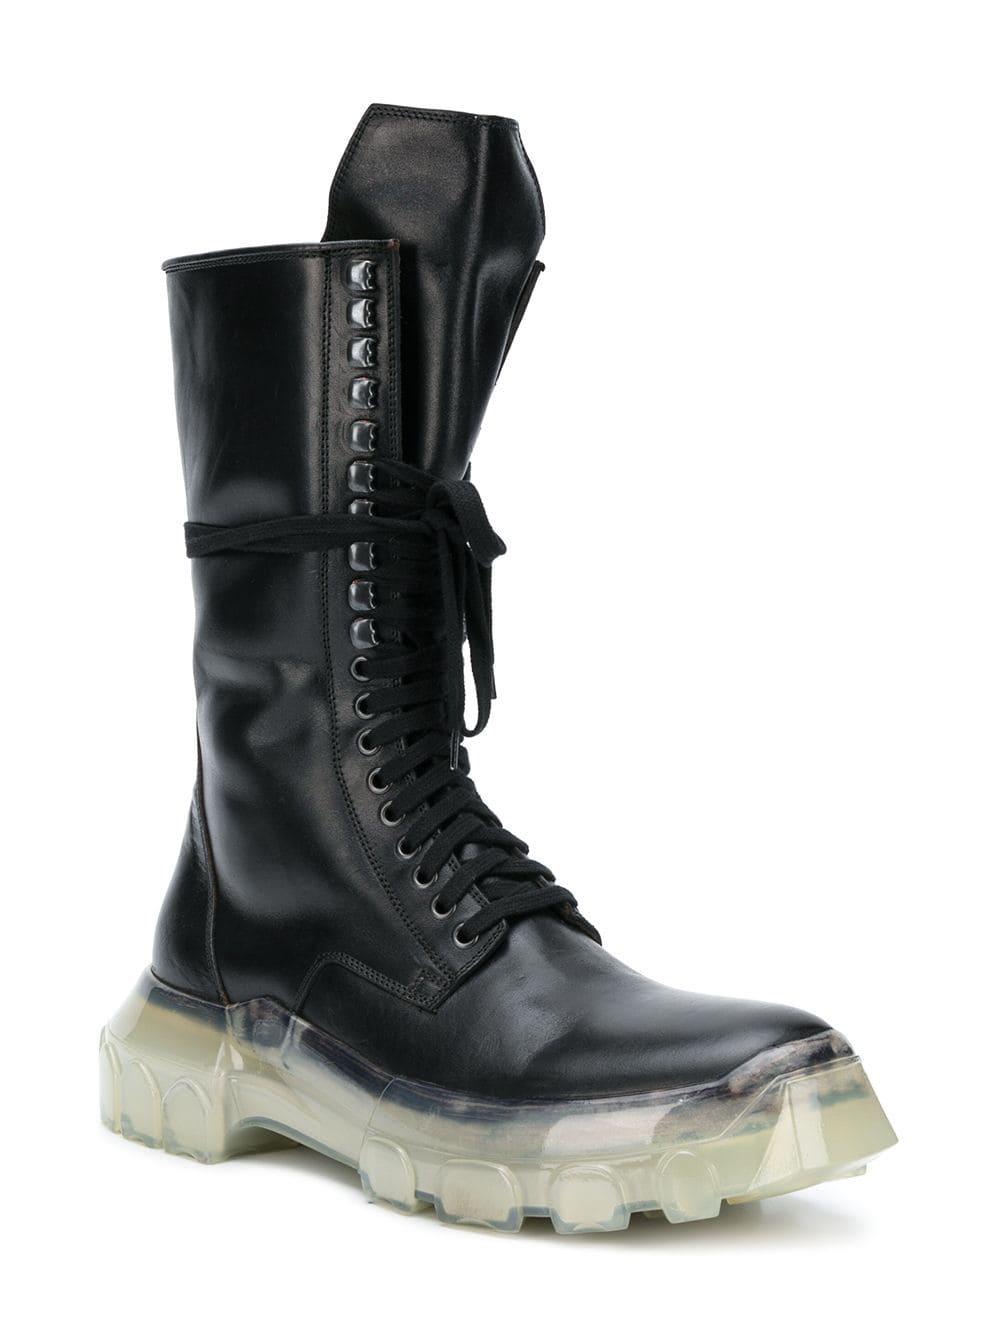 Rick Owens Bozo Tractor boots